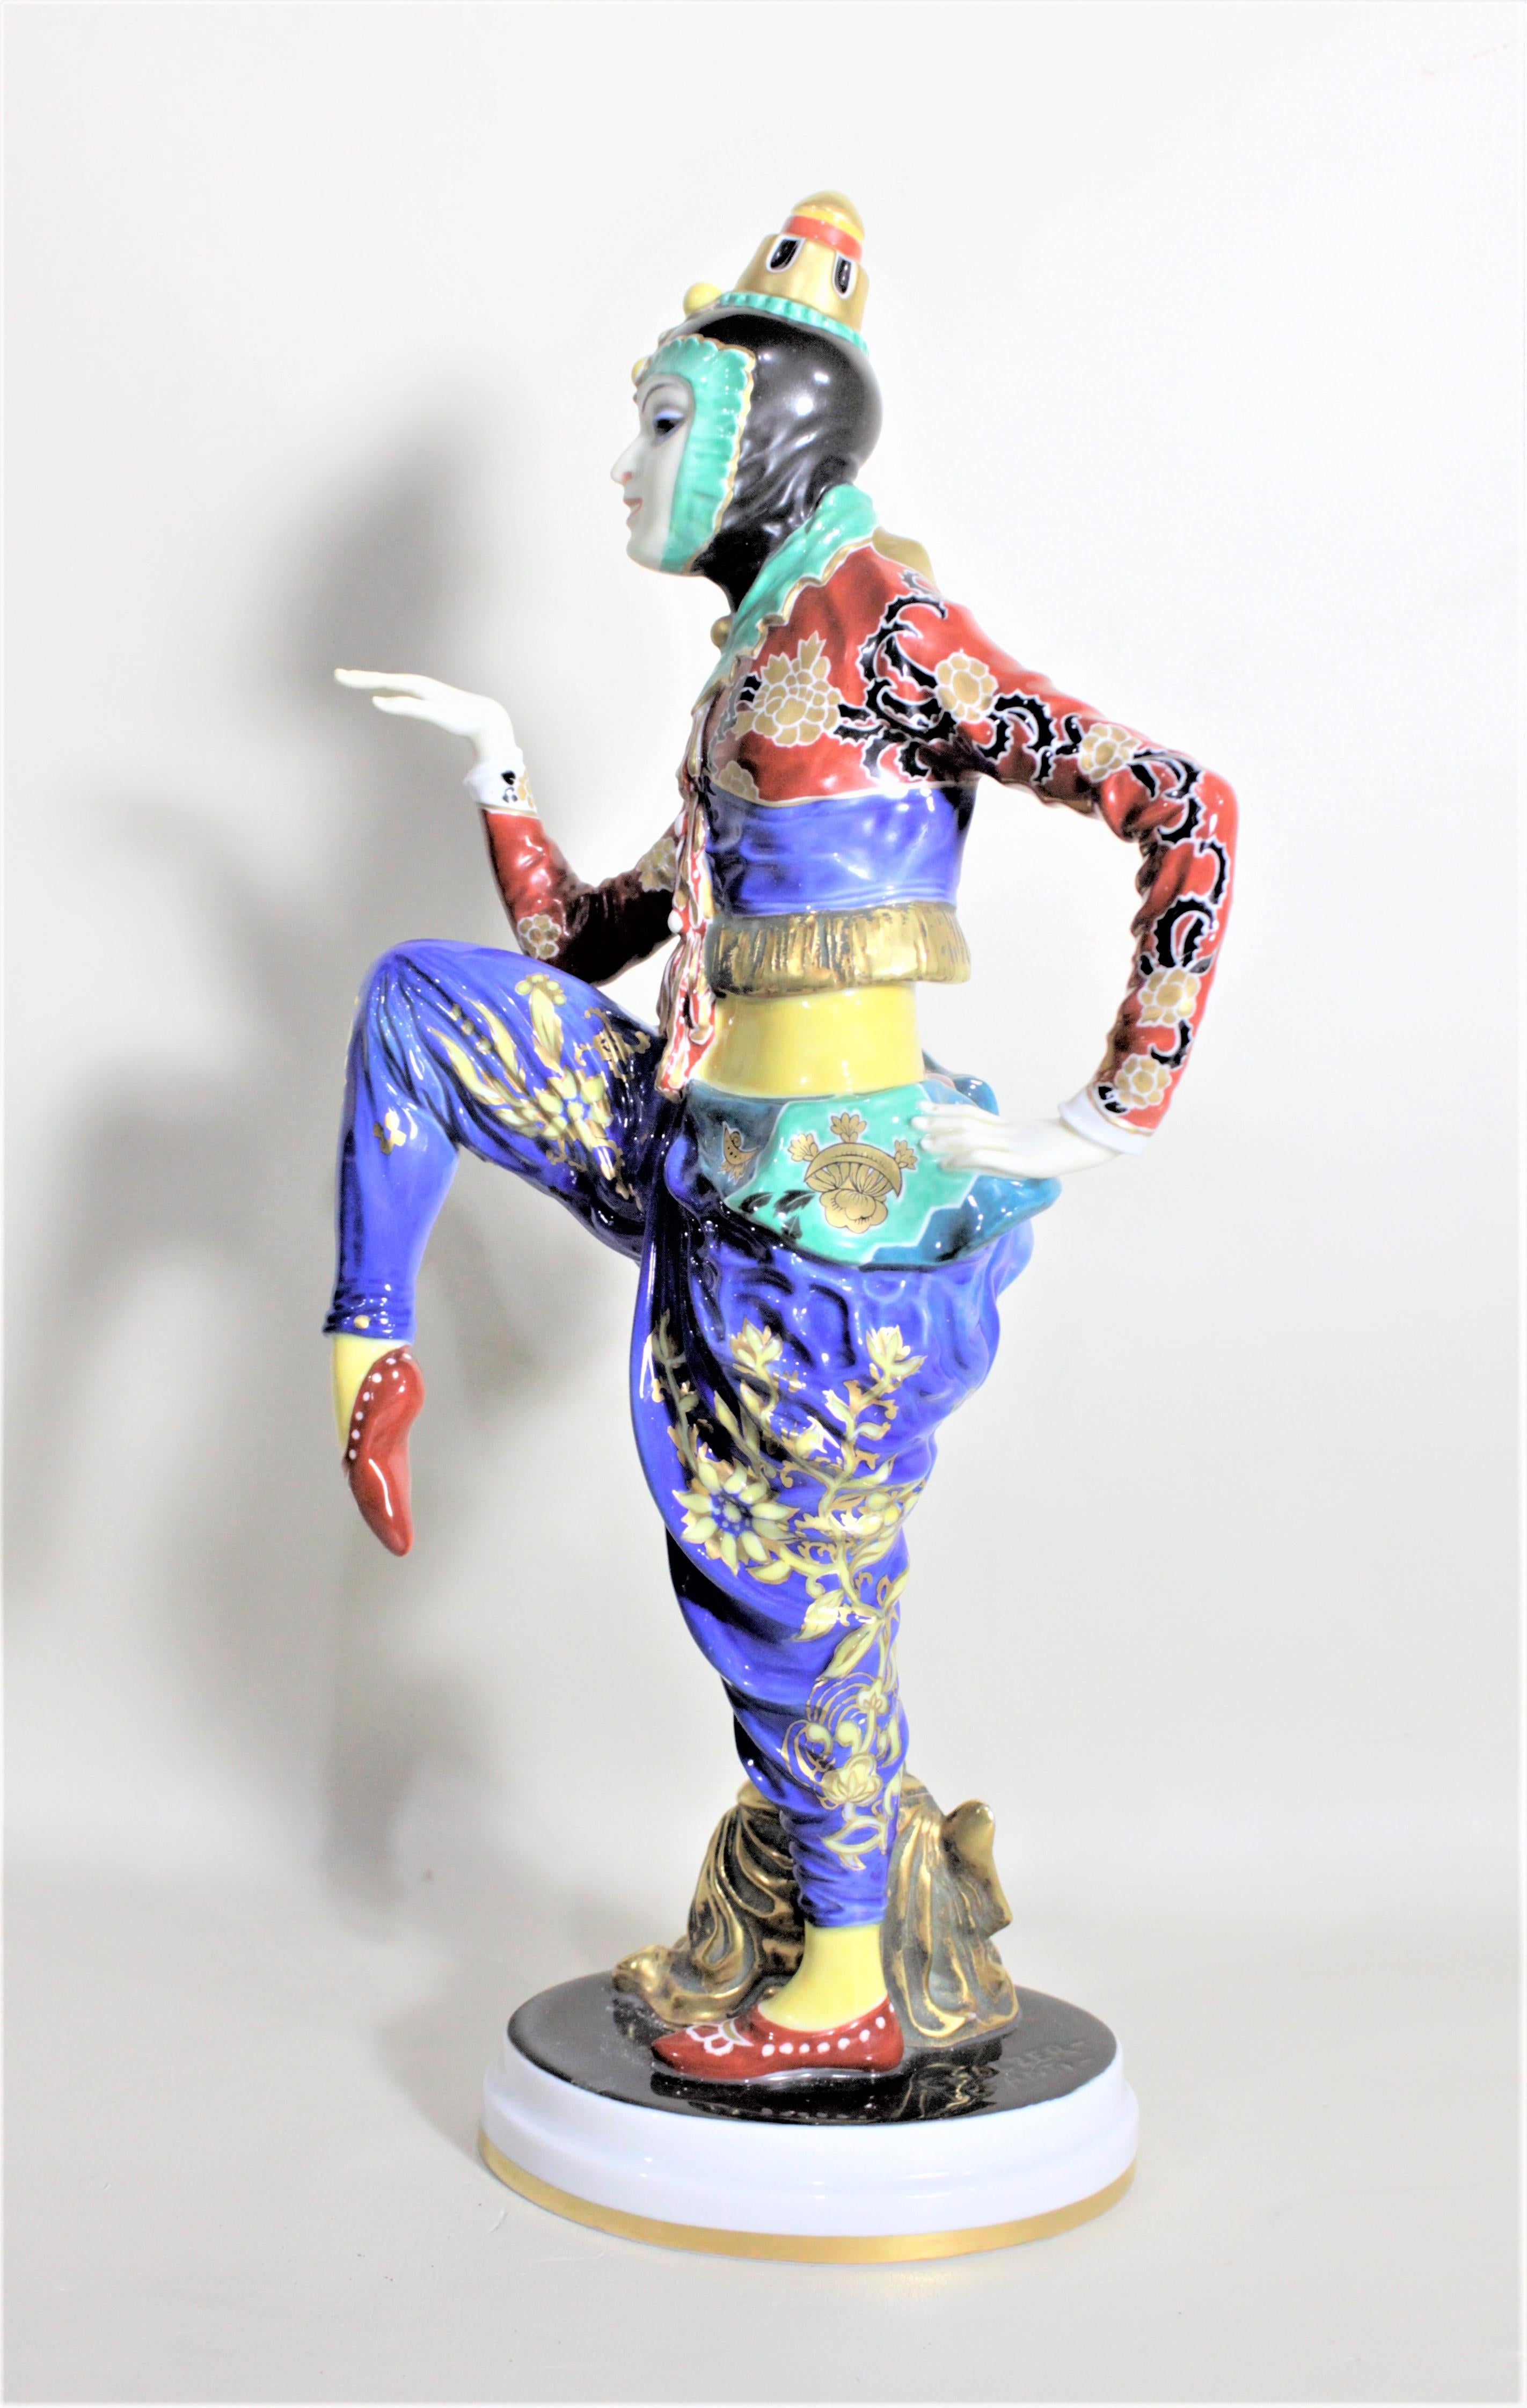 This large porcelain figurine was manufactured by the Rosenthal Porcelain Factory and is entitled 'Korean Dancer' and made in circa 1927 in the period Art Deco style. This figurine was designed by the Austrian sculptor Constantin Holzer-Decanti who